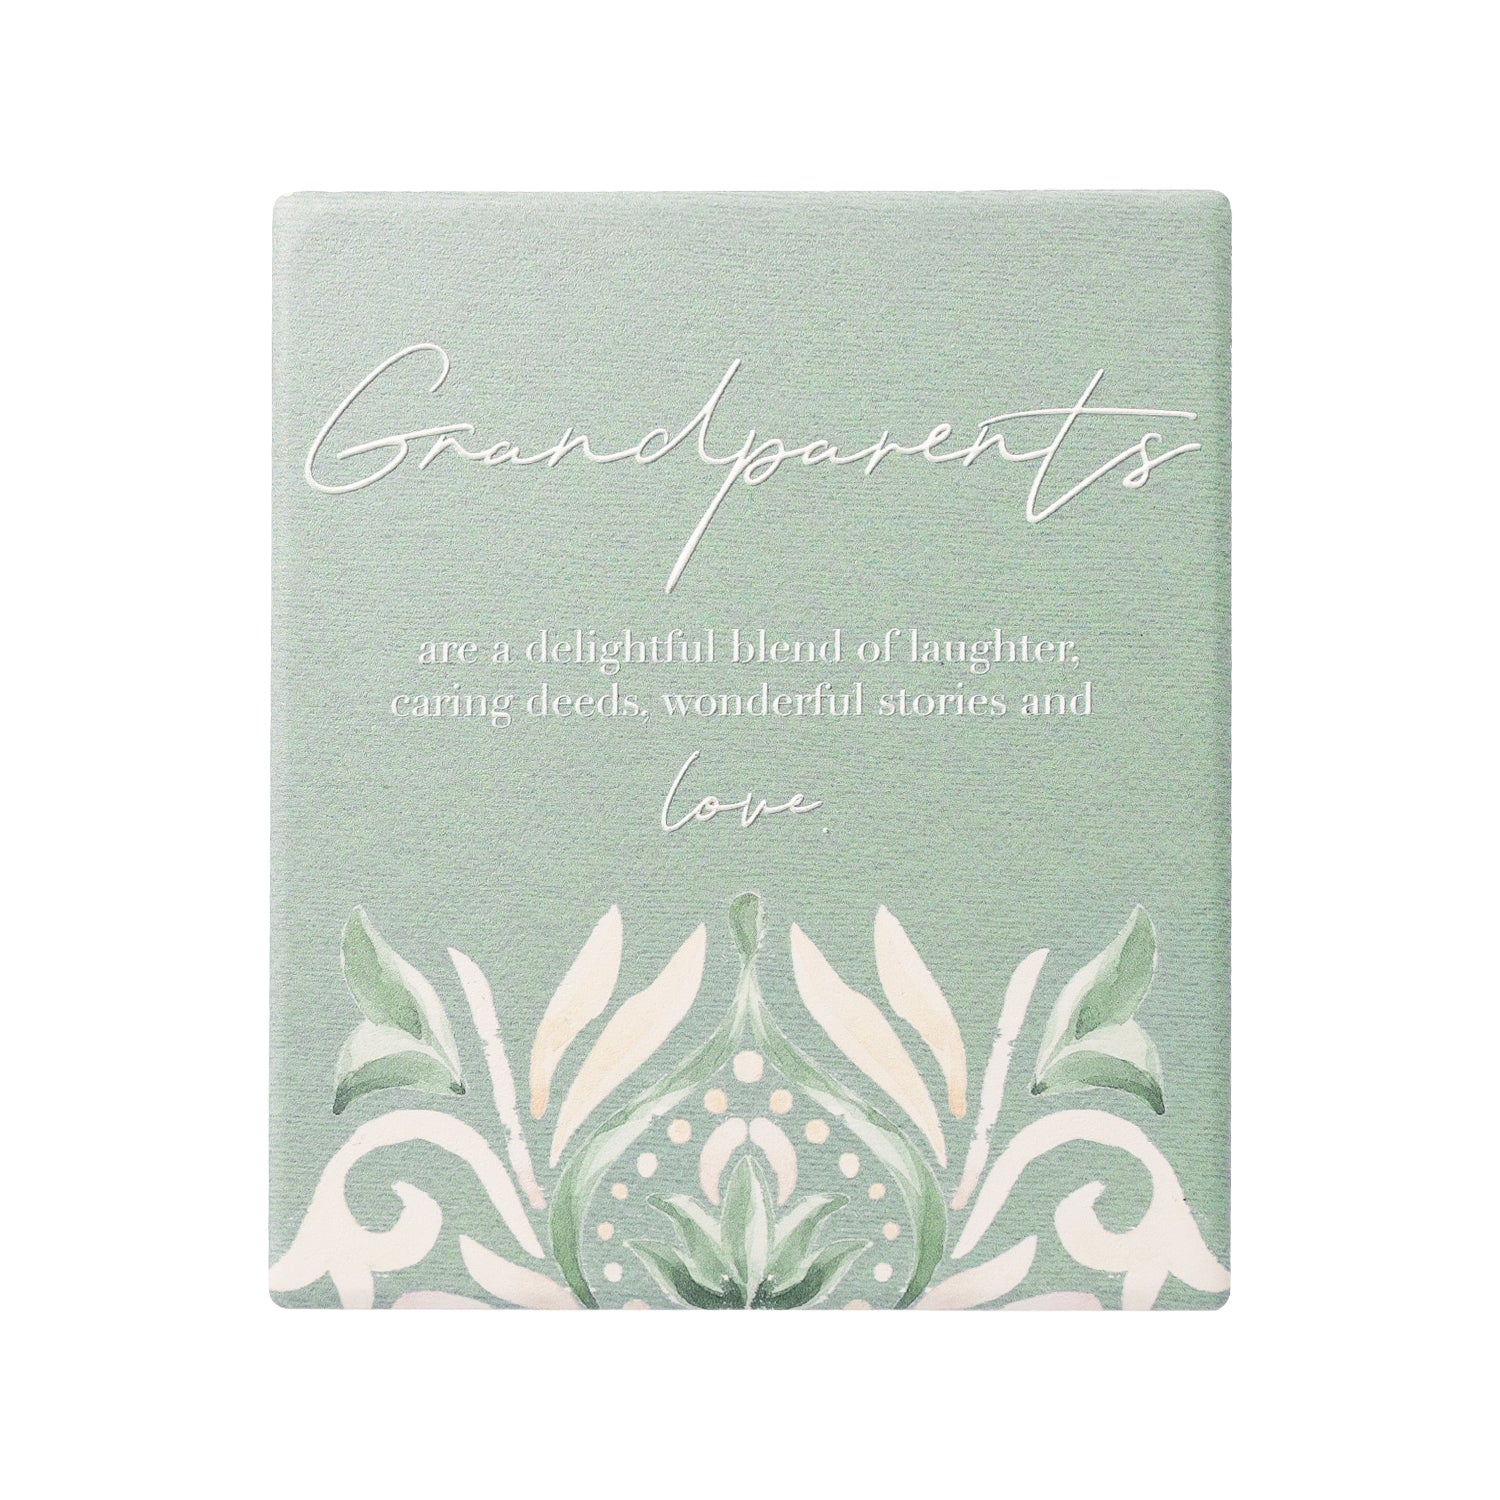 Ceramic grandparents verse with embossed design, stand and hanging hook